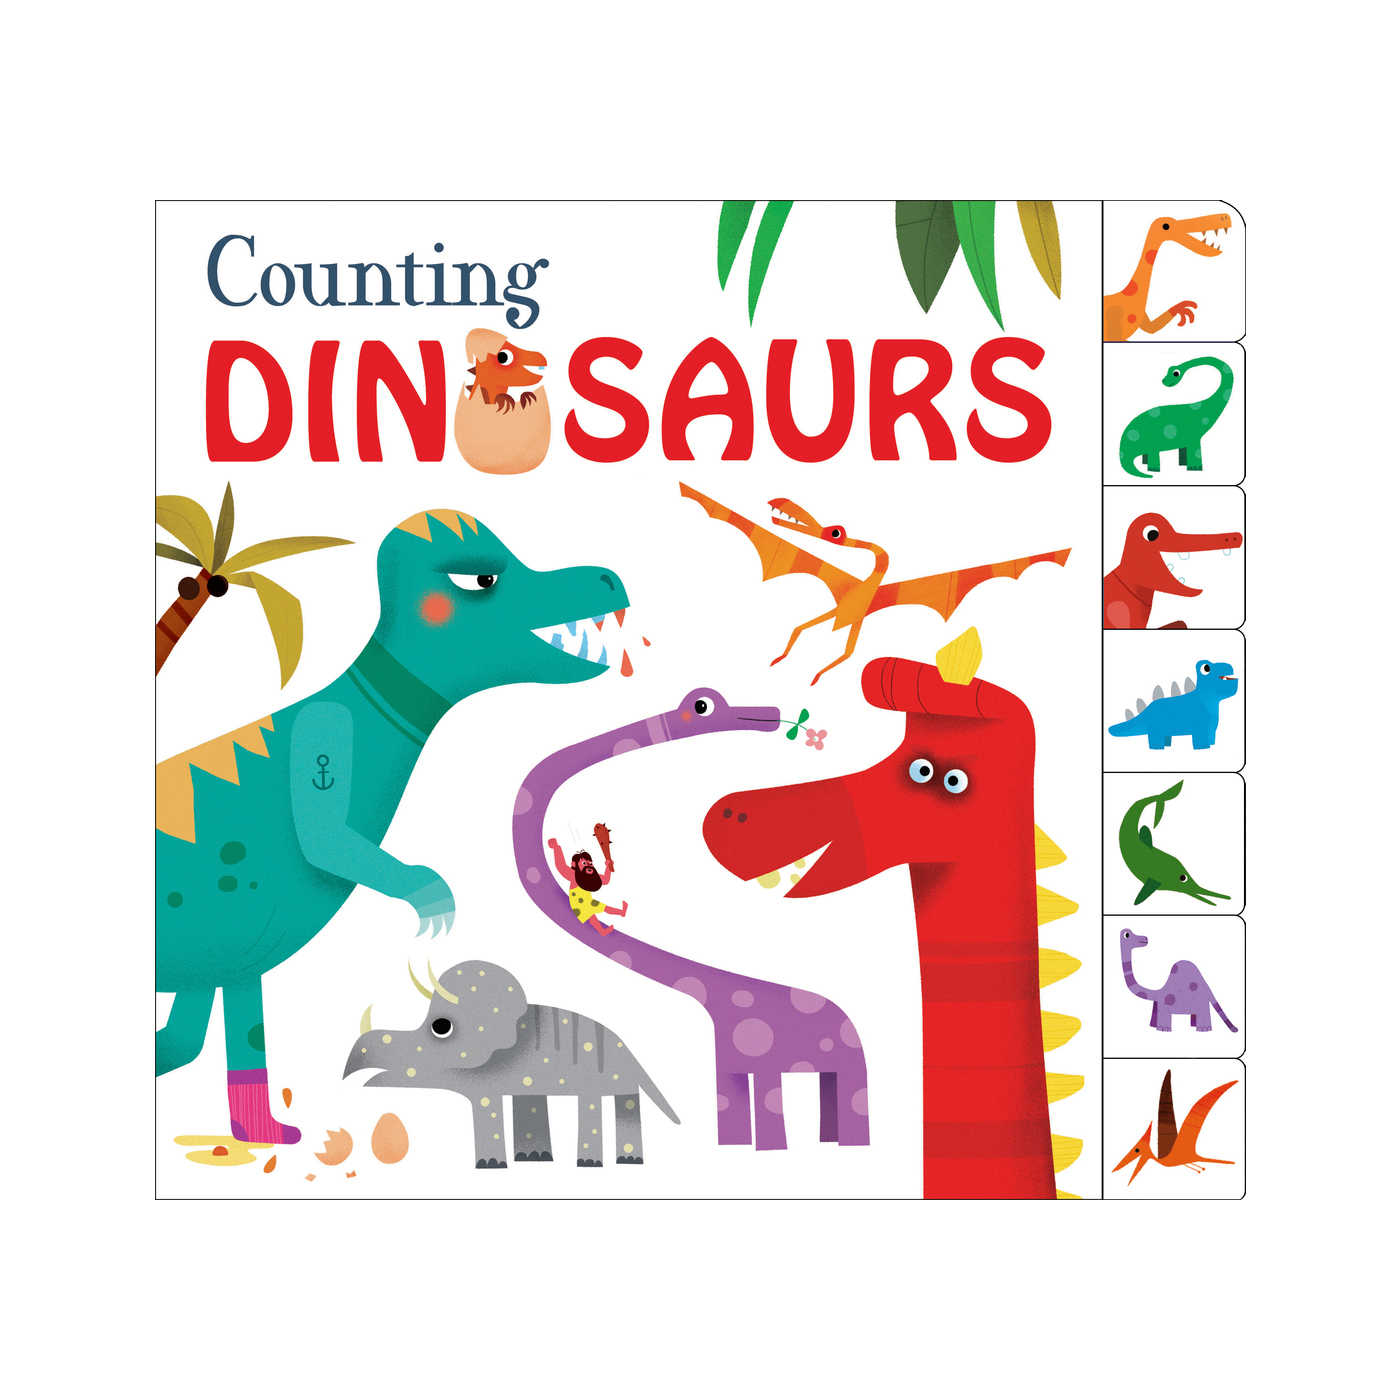  Counting Dinosaurs